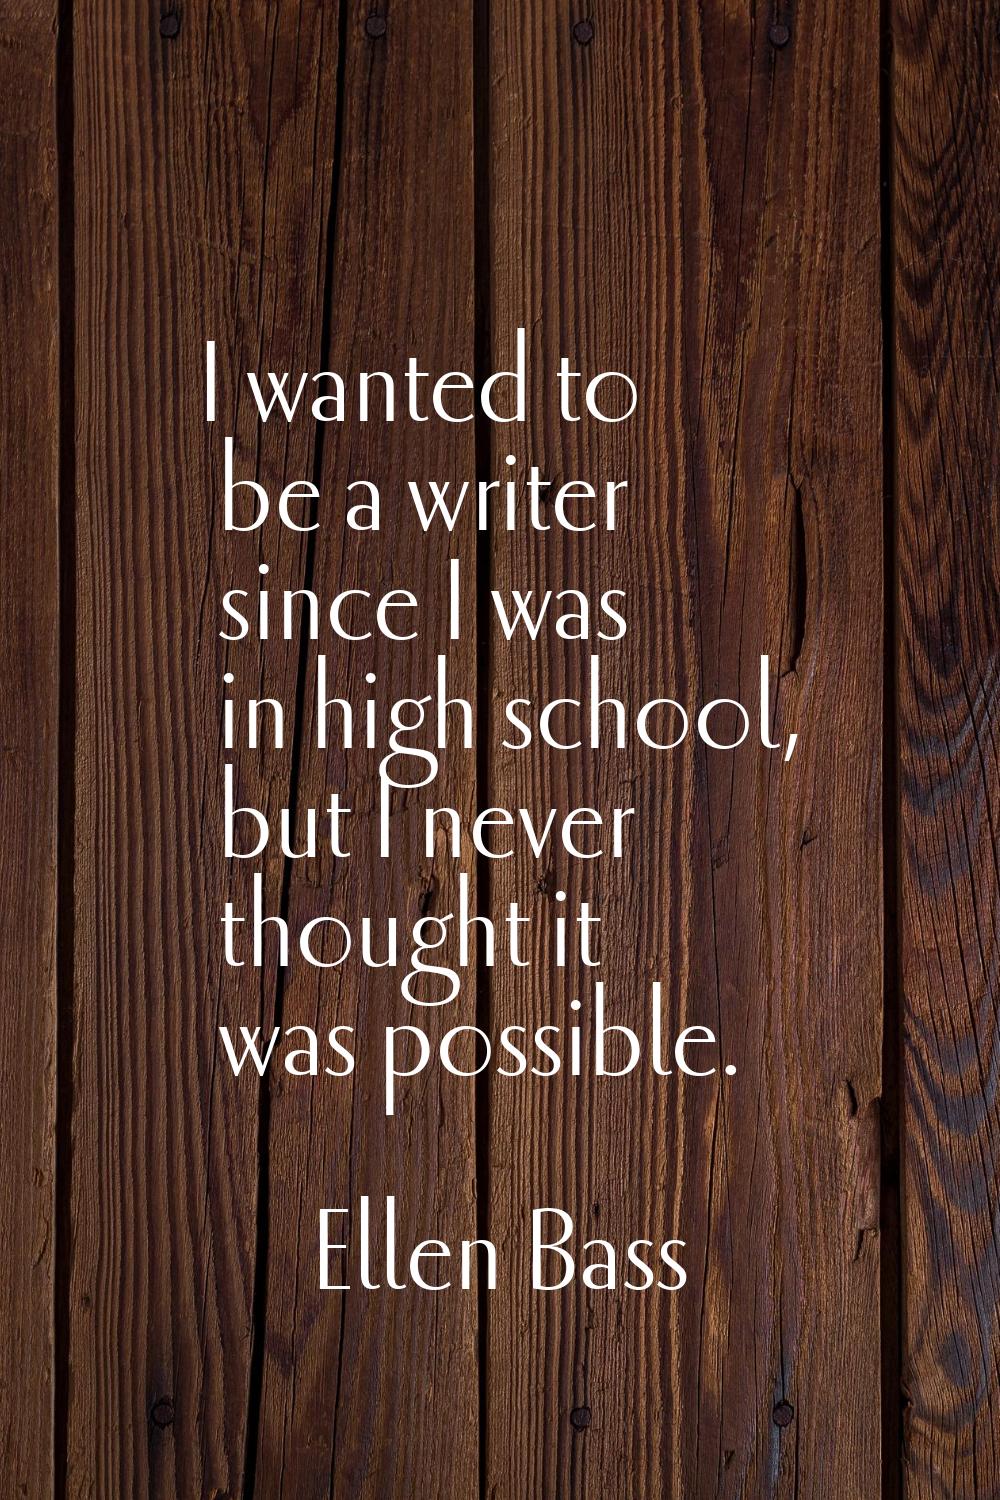 I wanted to be a writer since I was in high school, but I never thought it was possible.